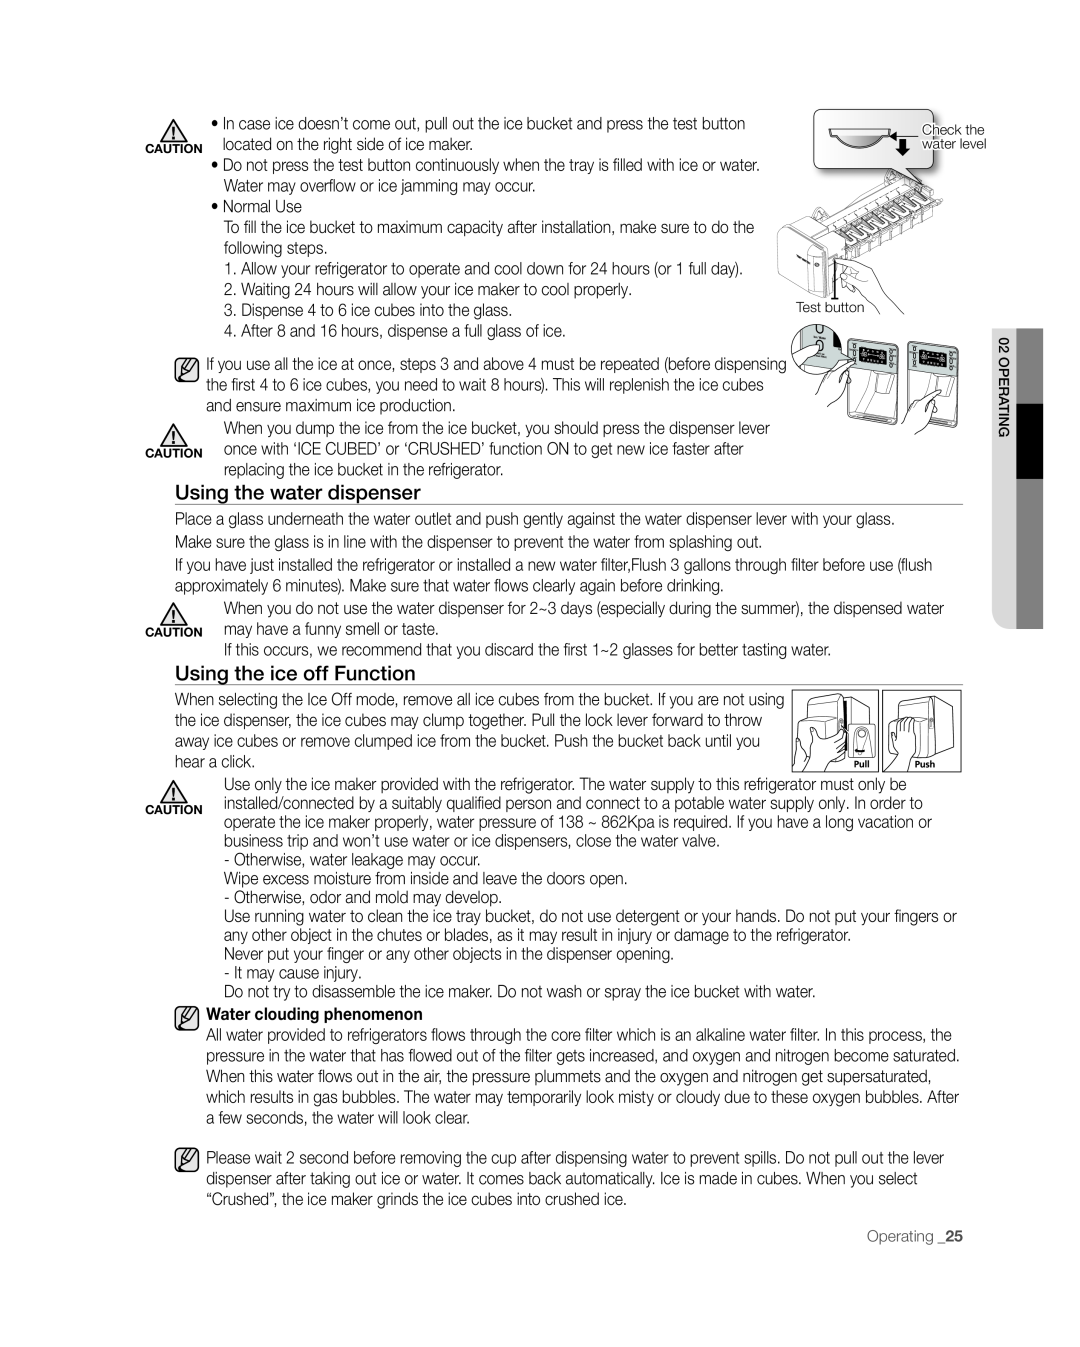 Samsung RF268** user manual Using the water dispenser, Using the ice off Function, Water clouding phenomenon 